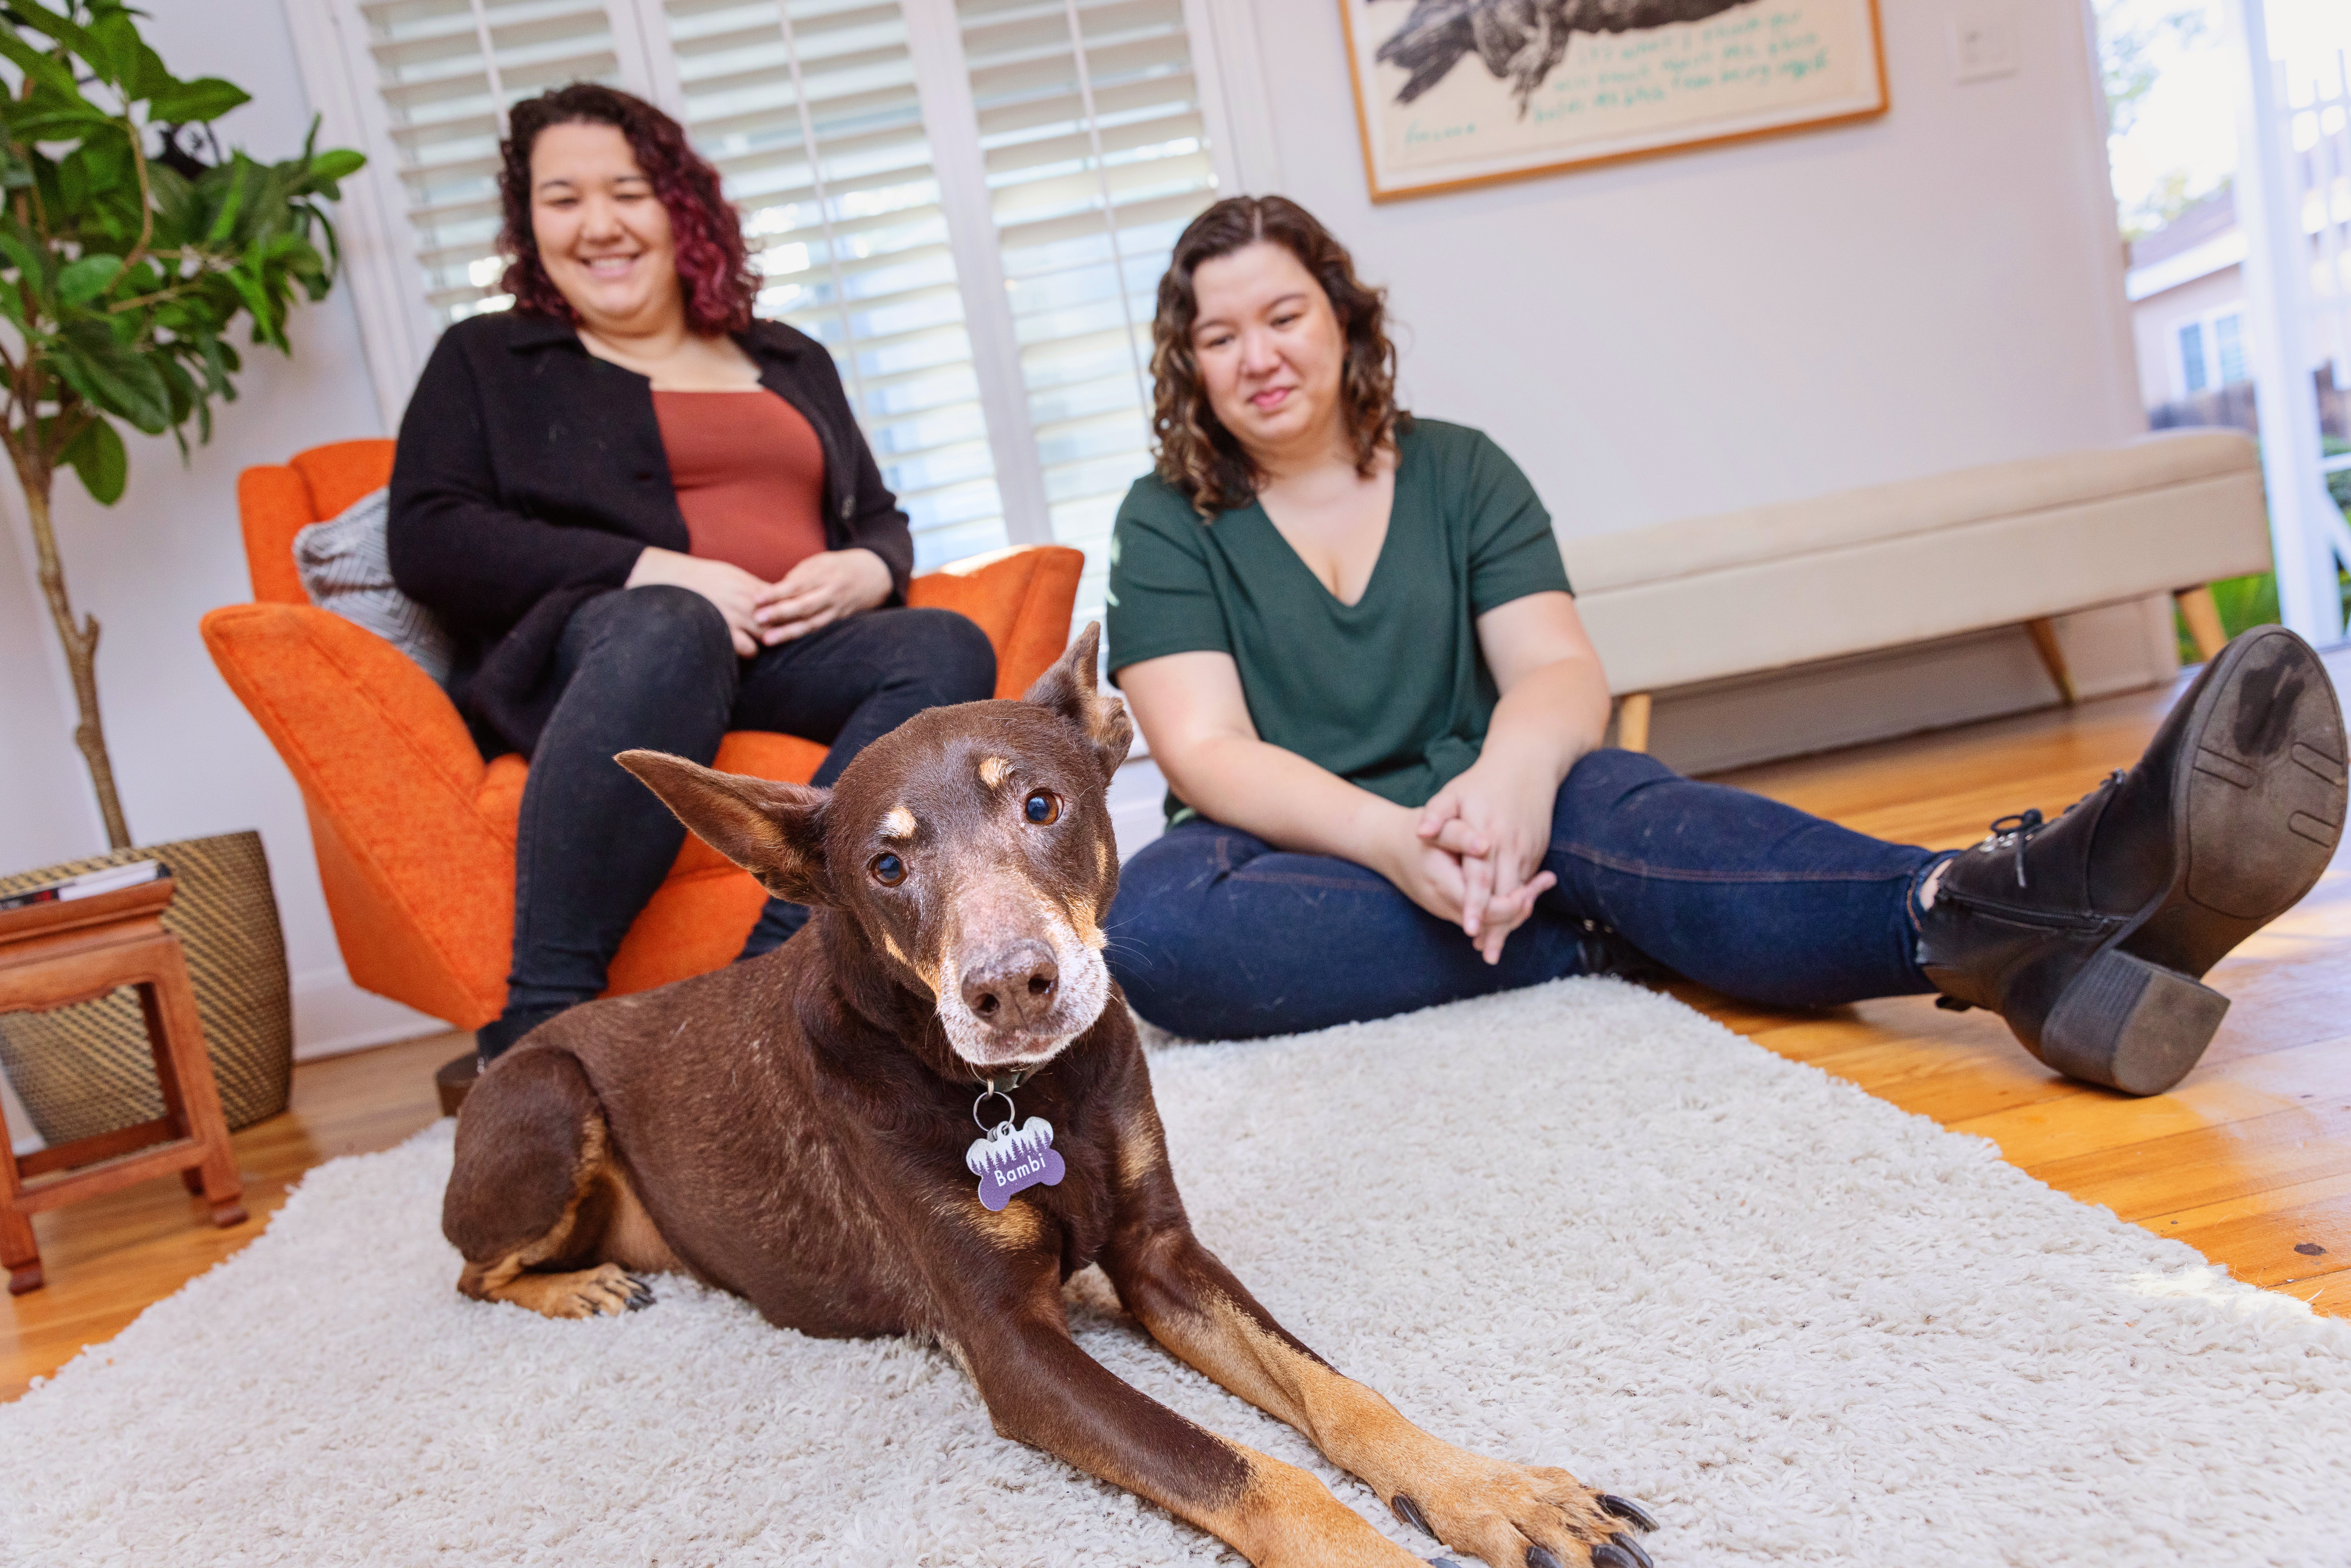 Two smiling people relaxing with a dog in a living room on the floor